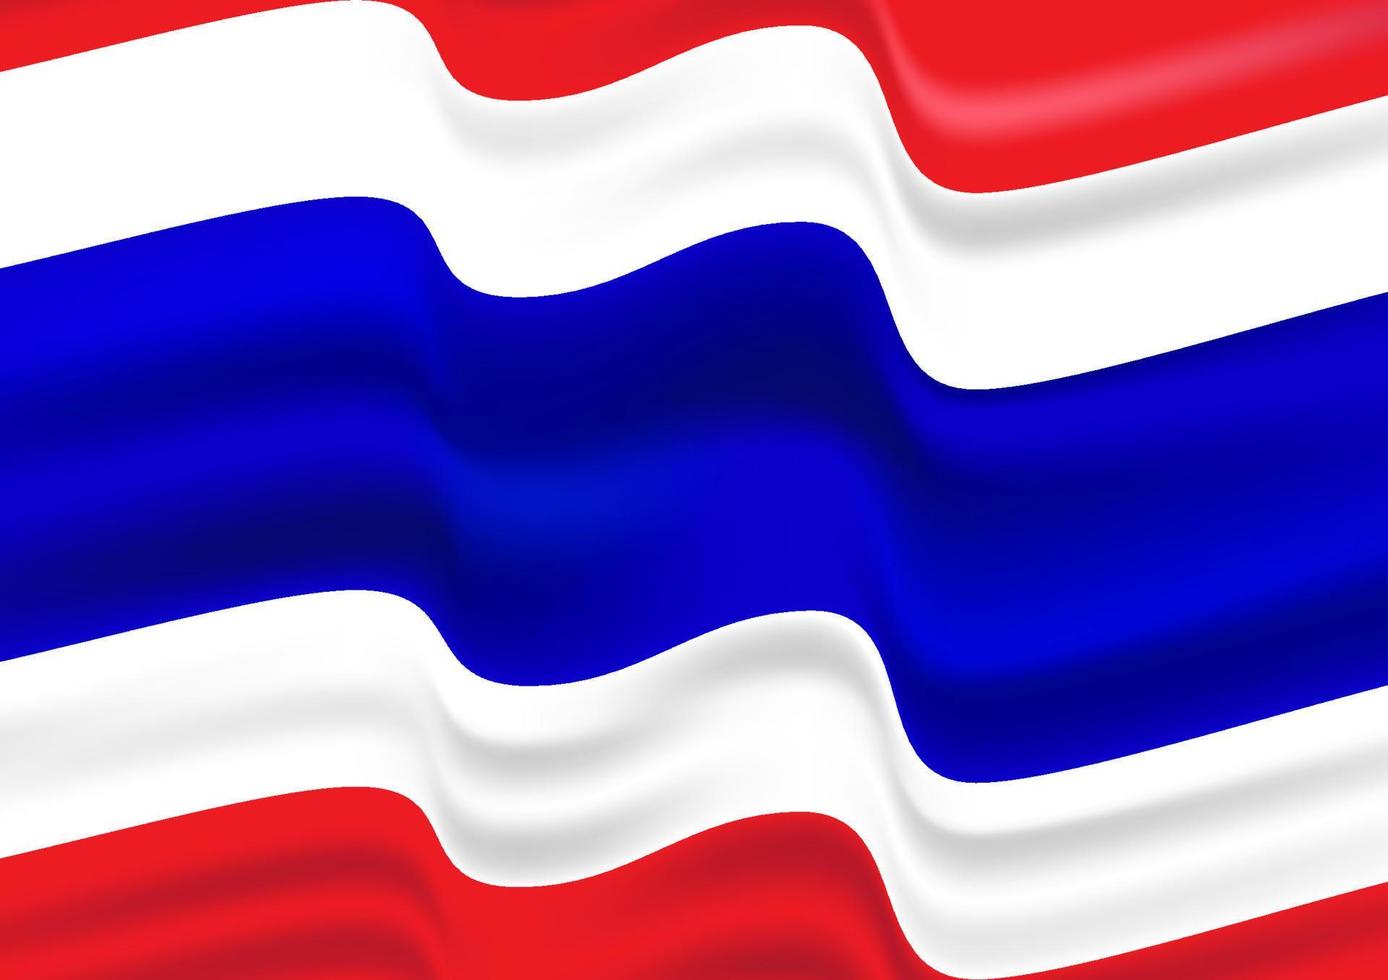 graphics image flag of Thailand with 3 colors red, white, blue for background vector illustration